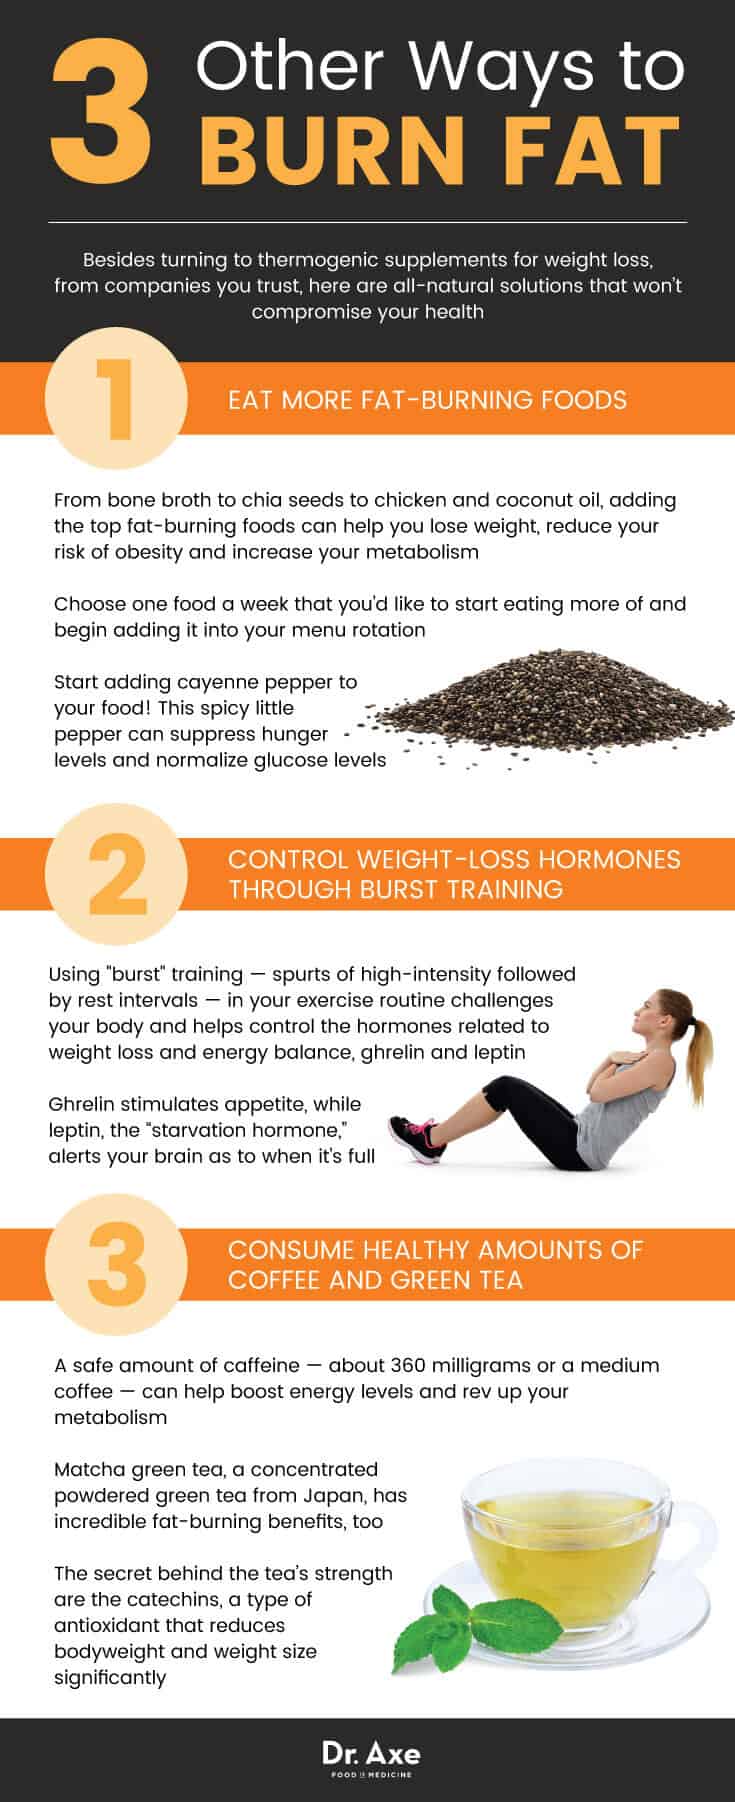 Other ways to burn fat - Dr. Axe